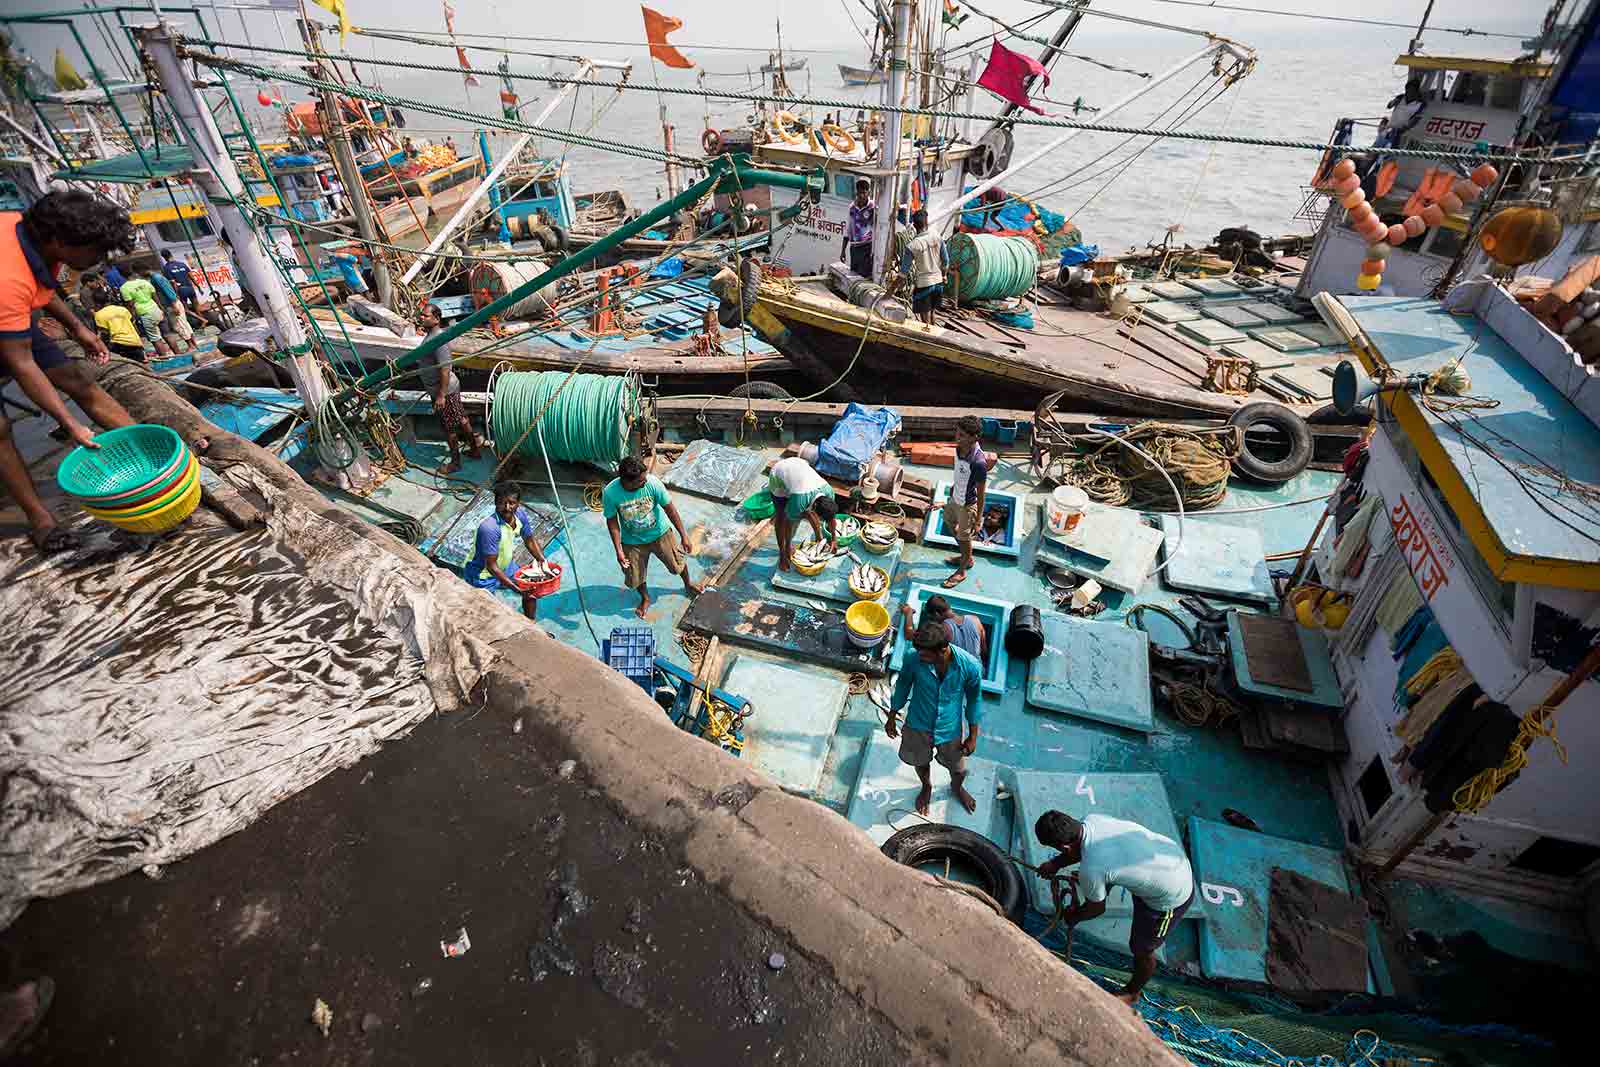 Currently, about 1,500 trawlers operate at the Sassoon Docks, bringing in around 20 tonnes of fish every day.